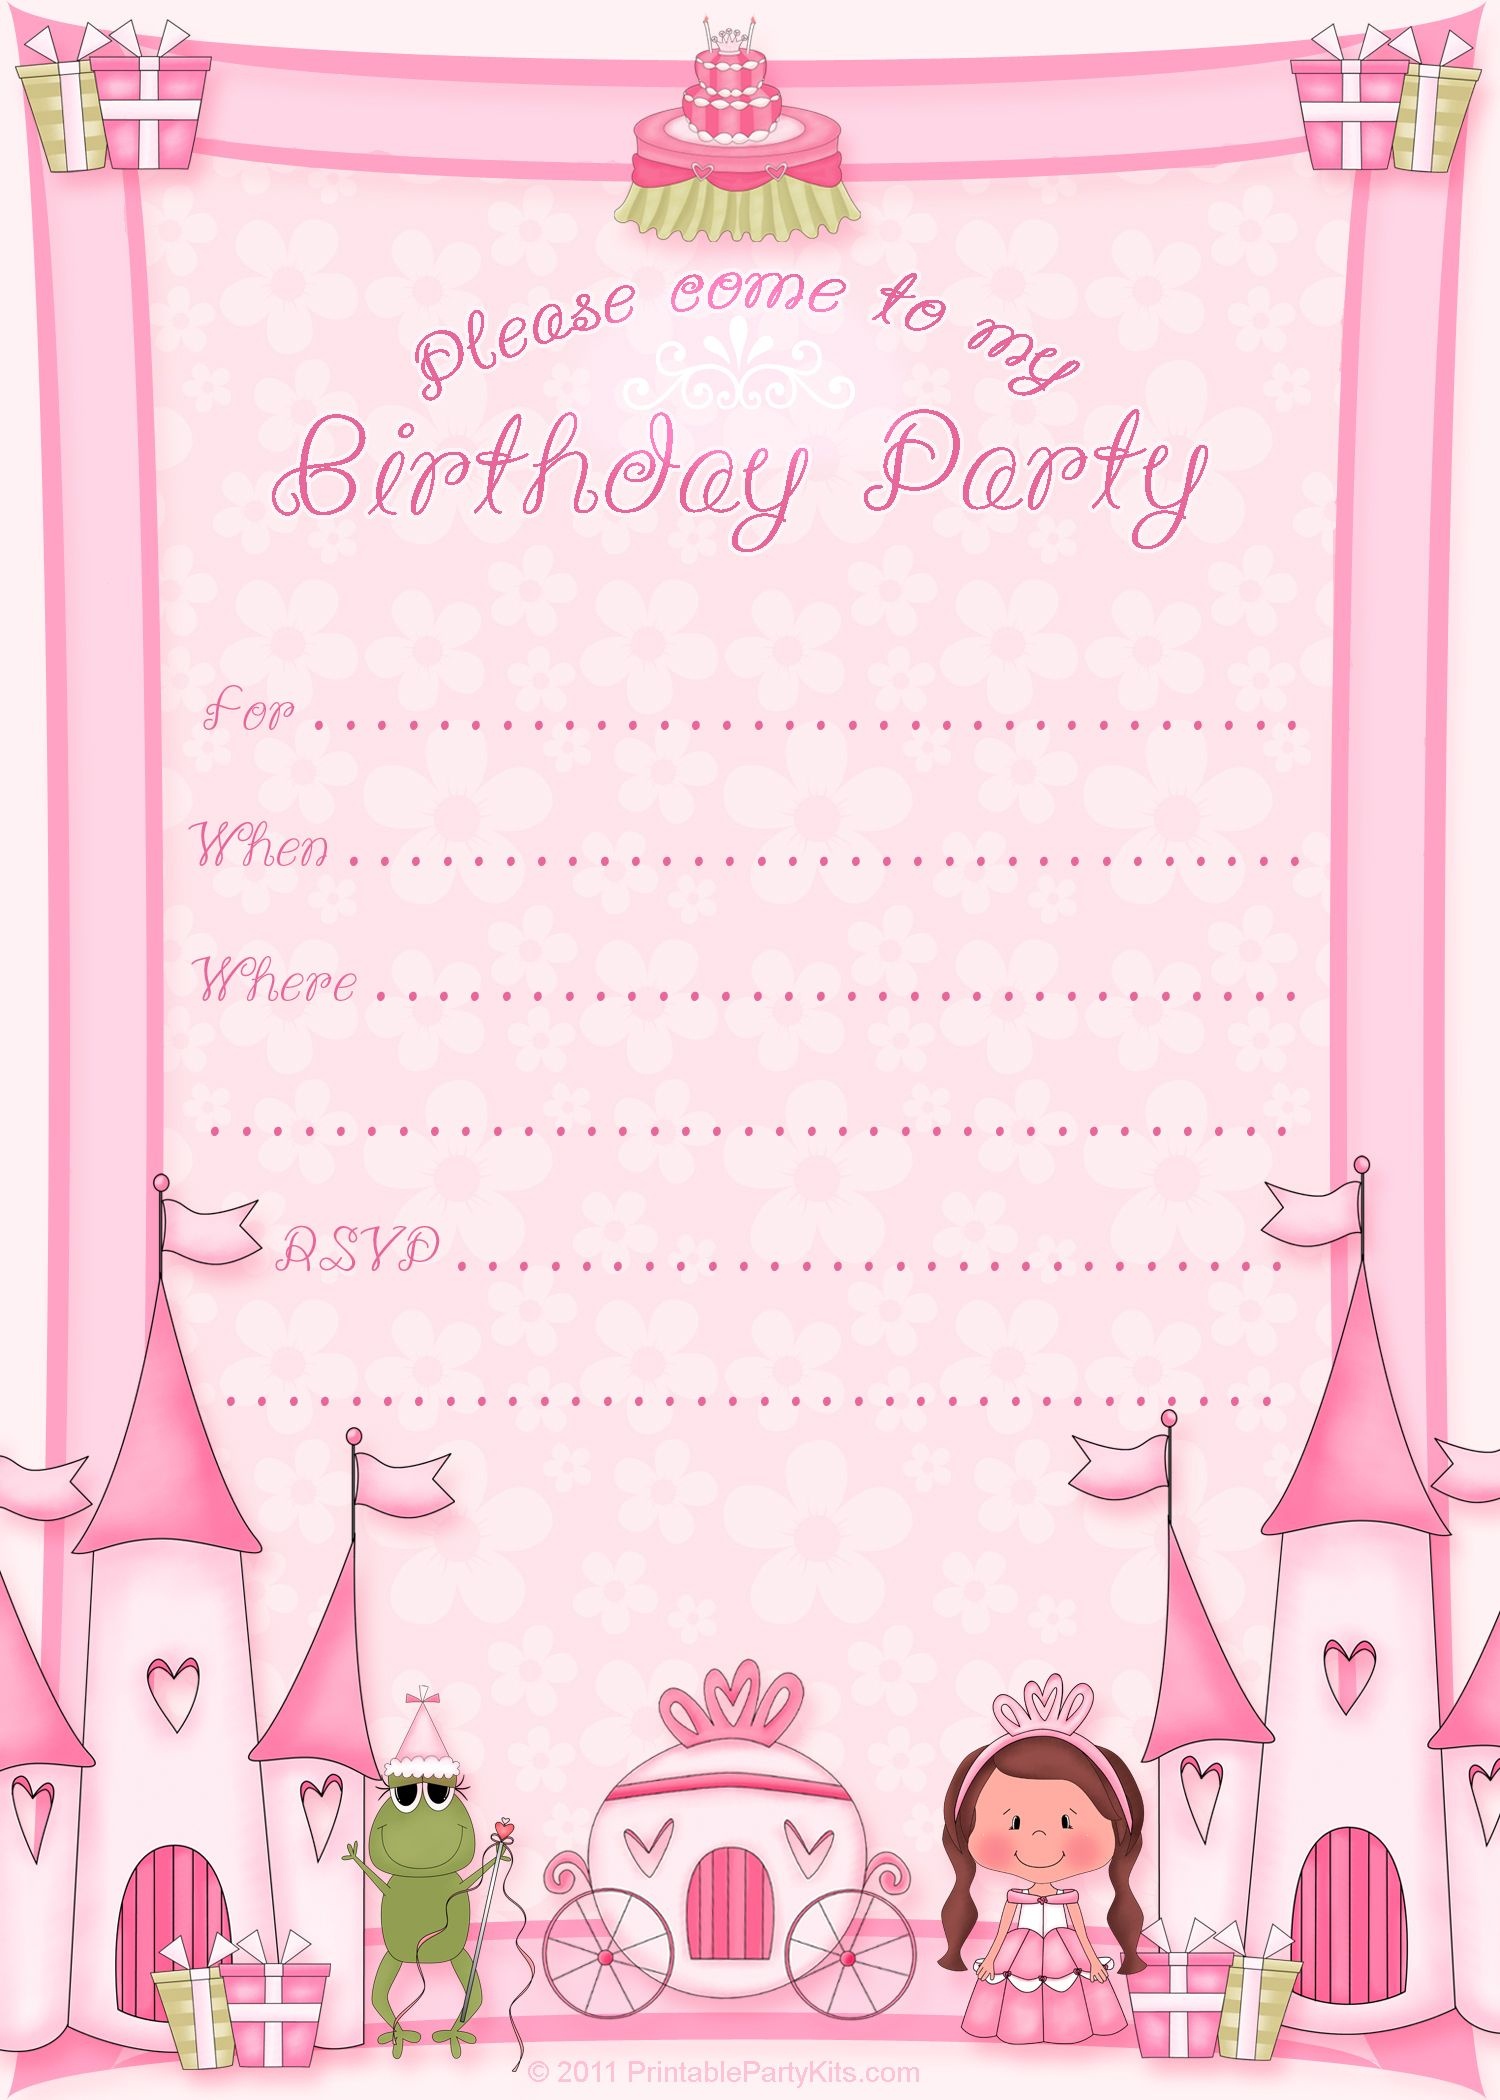 Free Printable Invitation. Pinned For Kidfolio, The Parenting Mobile - Free Printable Birthday Invitation Cards Templates